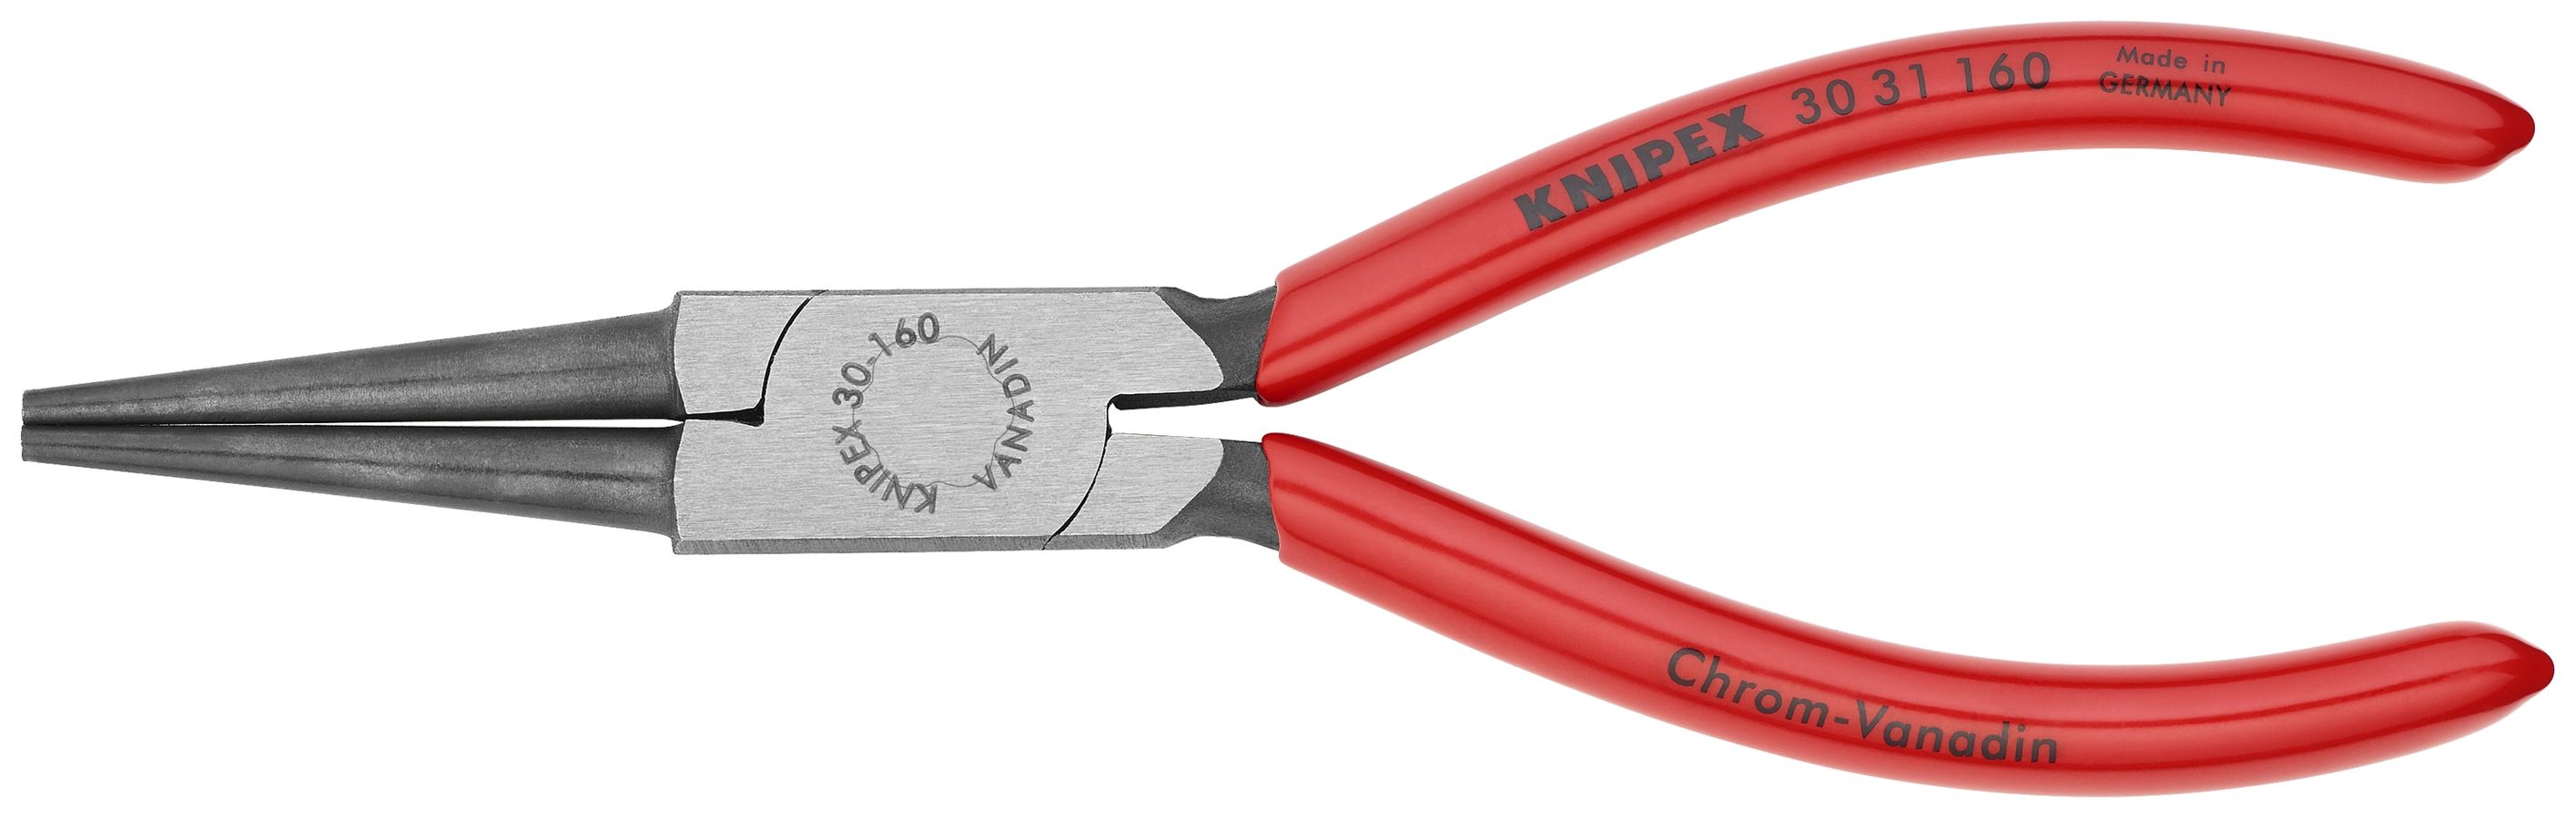 Knipex 6.3 Long Nose Pliers (half-round jaws) - Plastic Grip